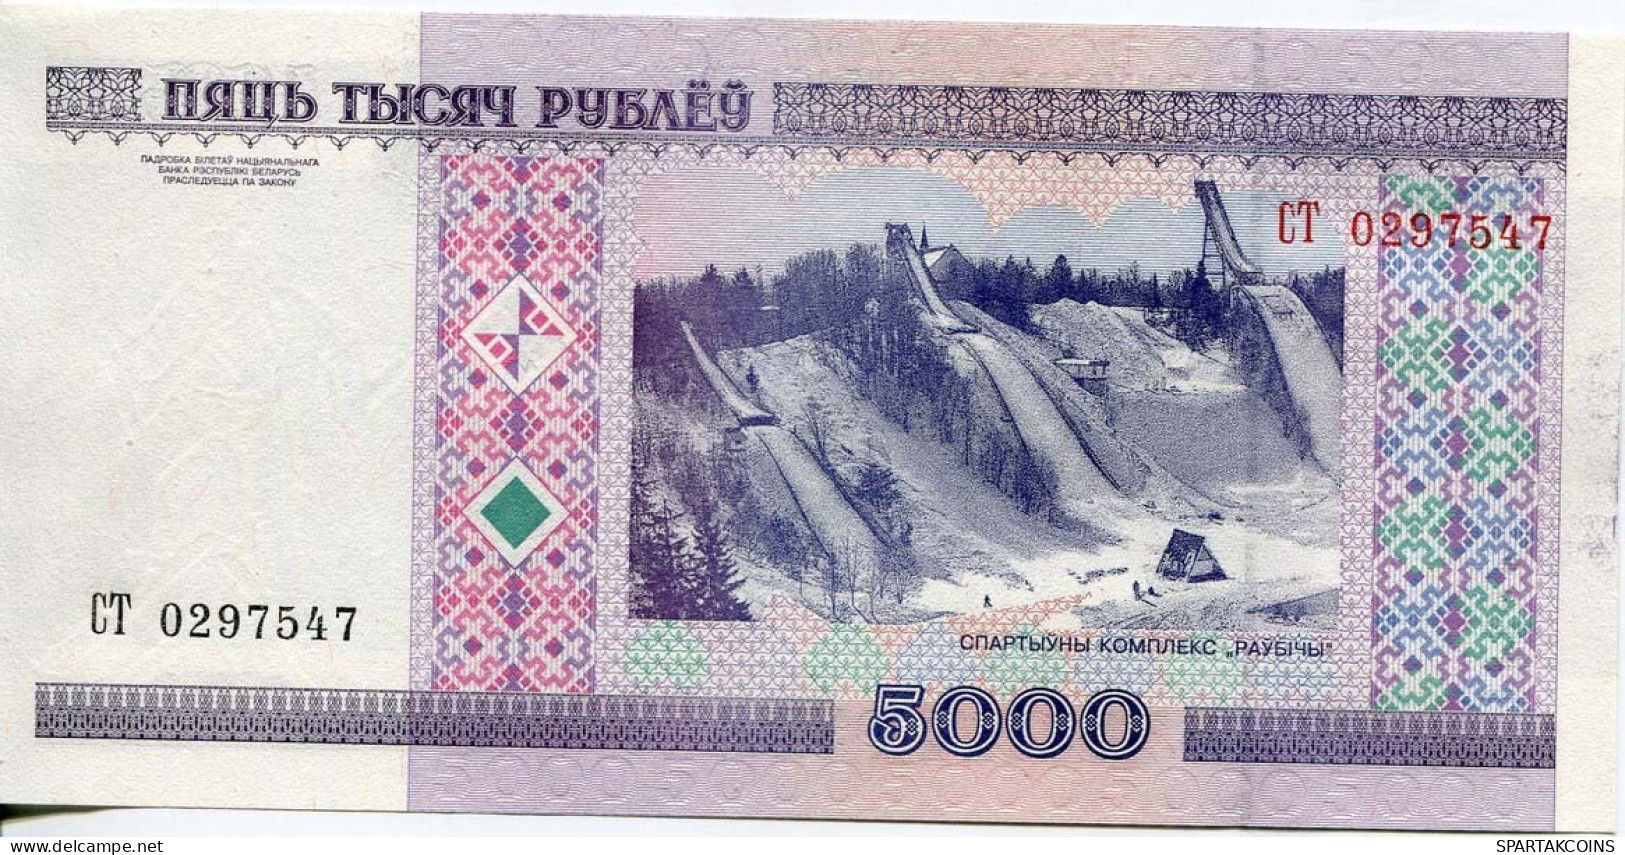 BELARUS 5000 RUBLES 2000 
Minsk Palace Of Sports Paper Money Banknote #P10205.V - [11] Local Banknote Issues